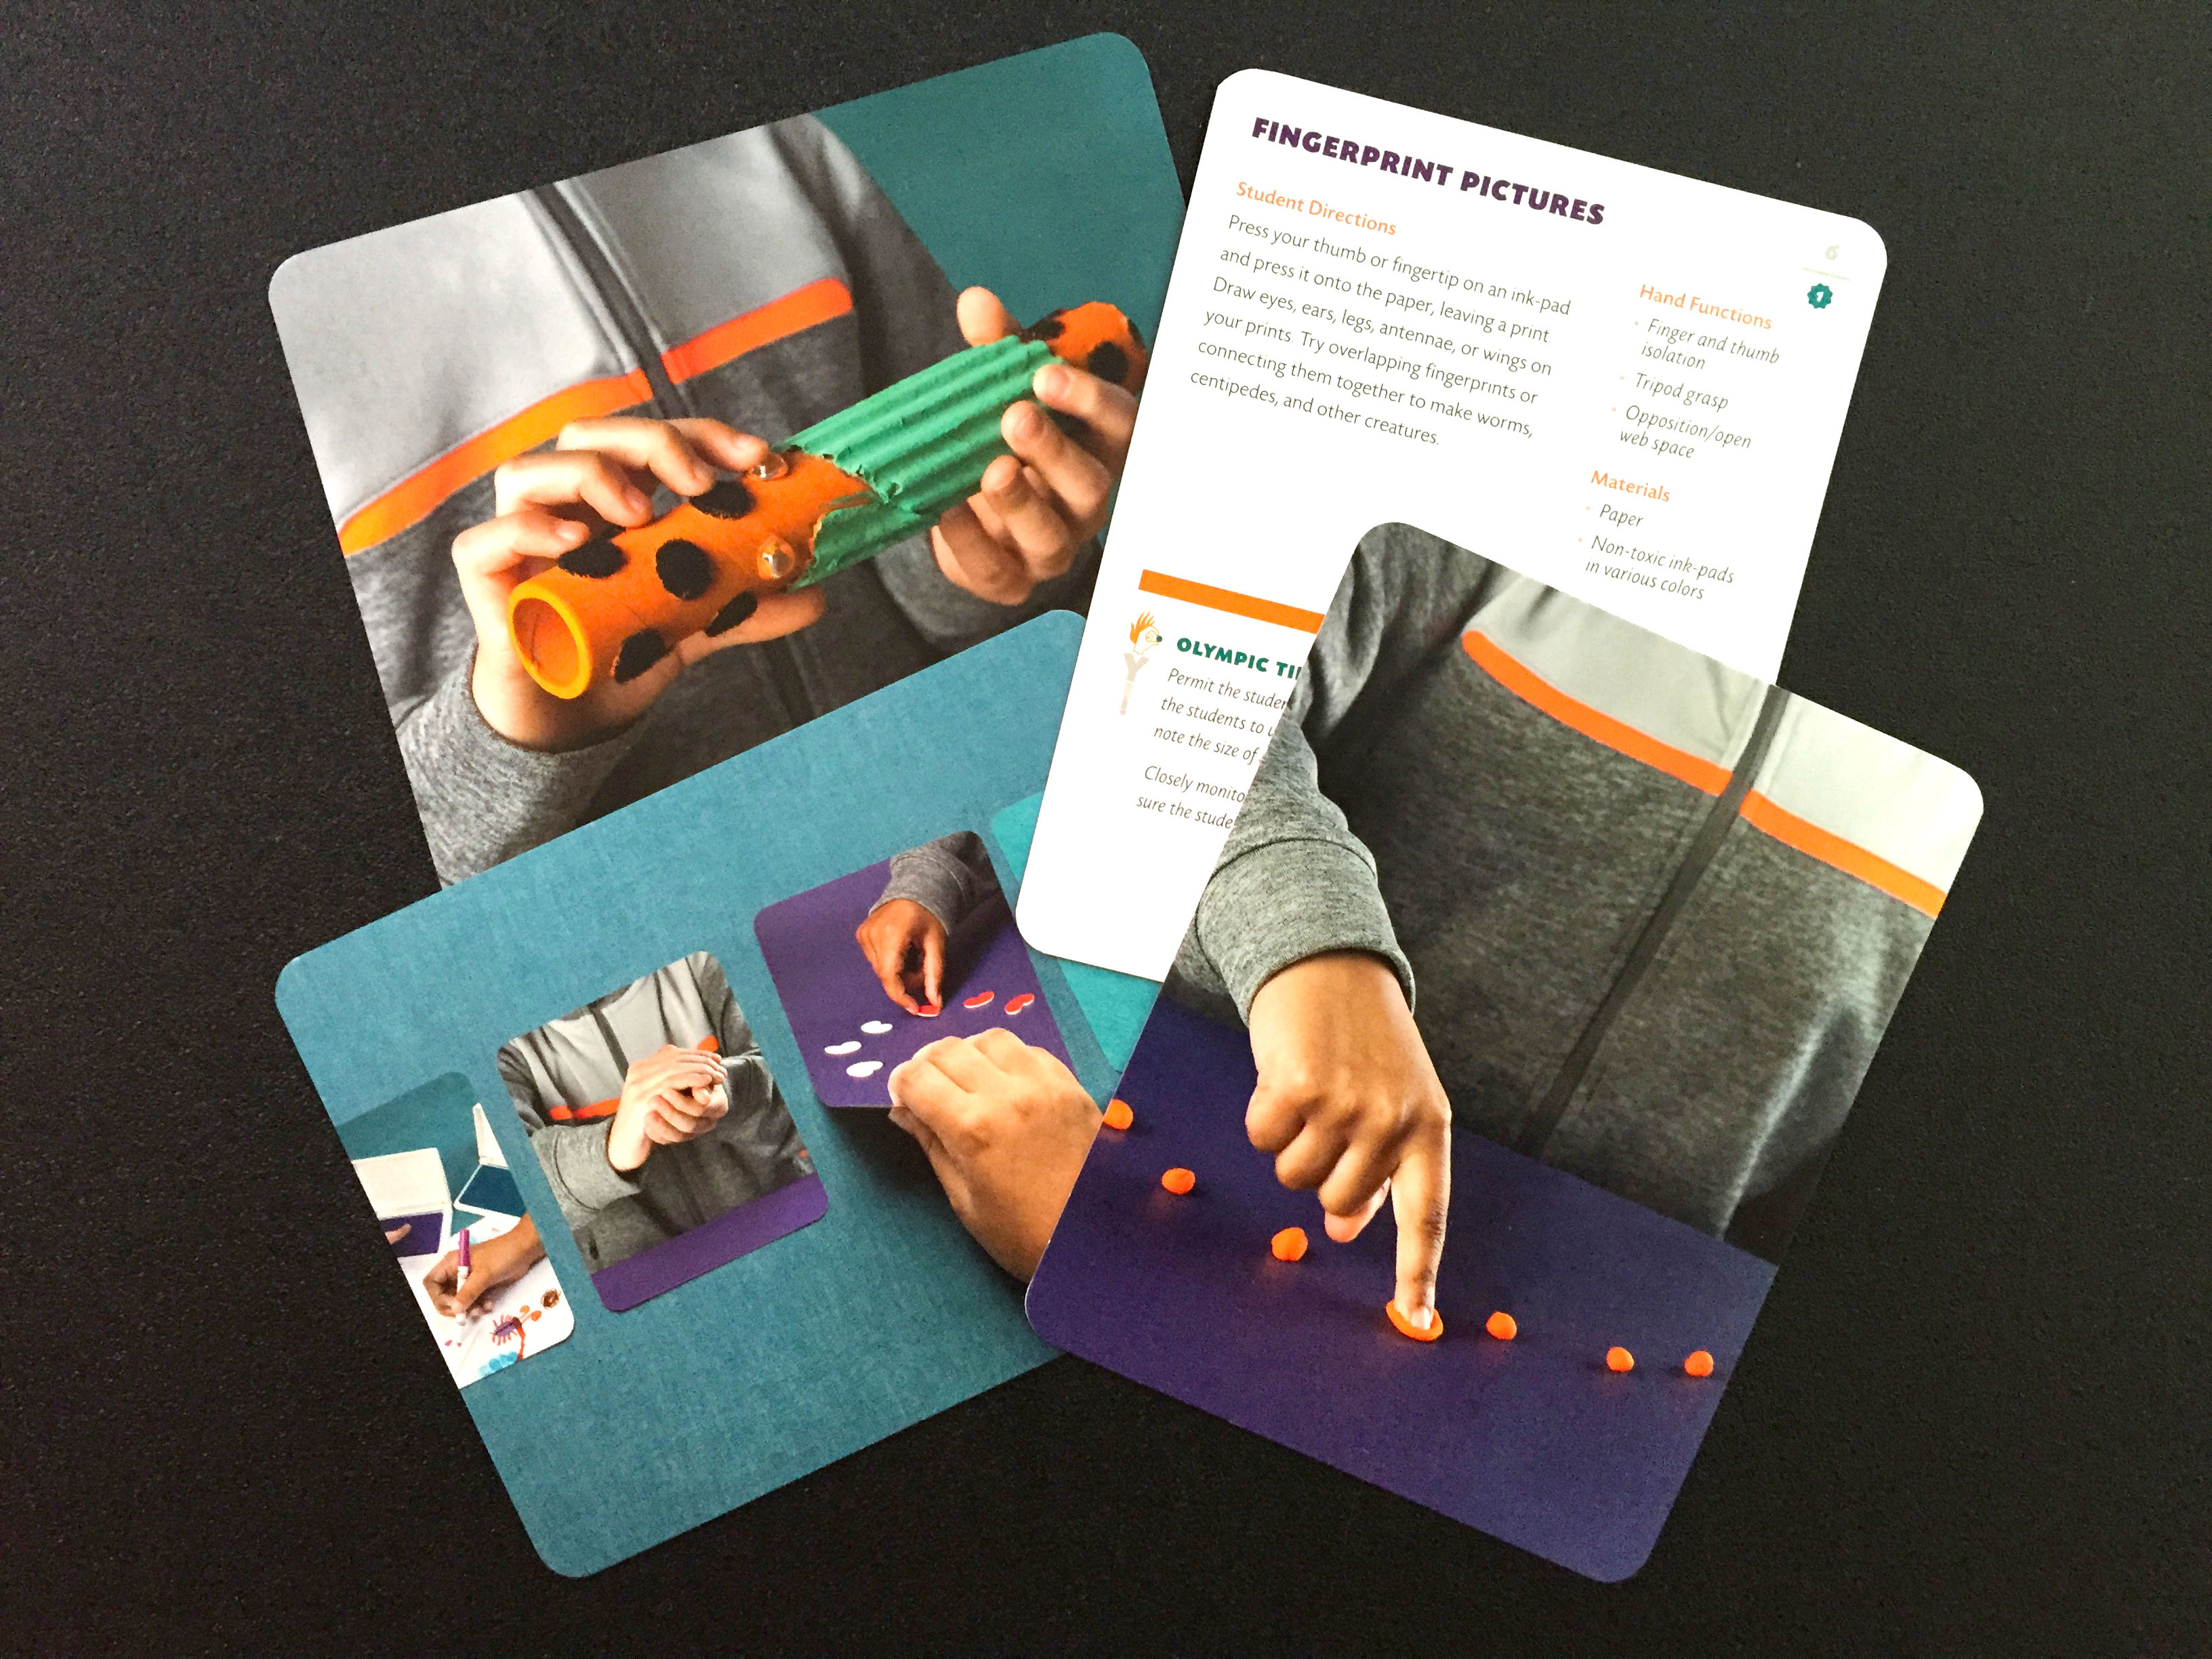 Cards showing colors and wardrobe choices for photography used in Fine Motor Olympics, an educational product designed by Milk Row Studio